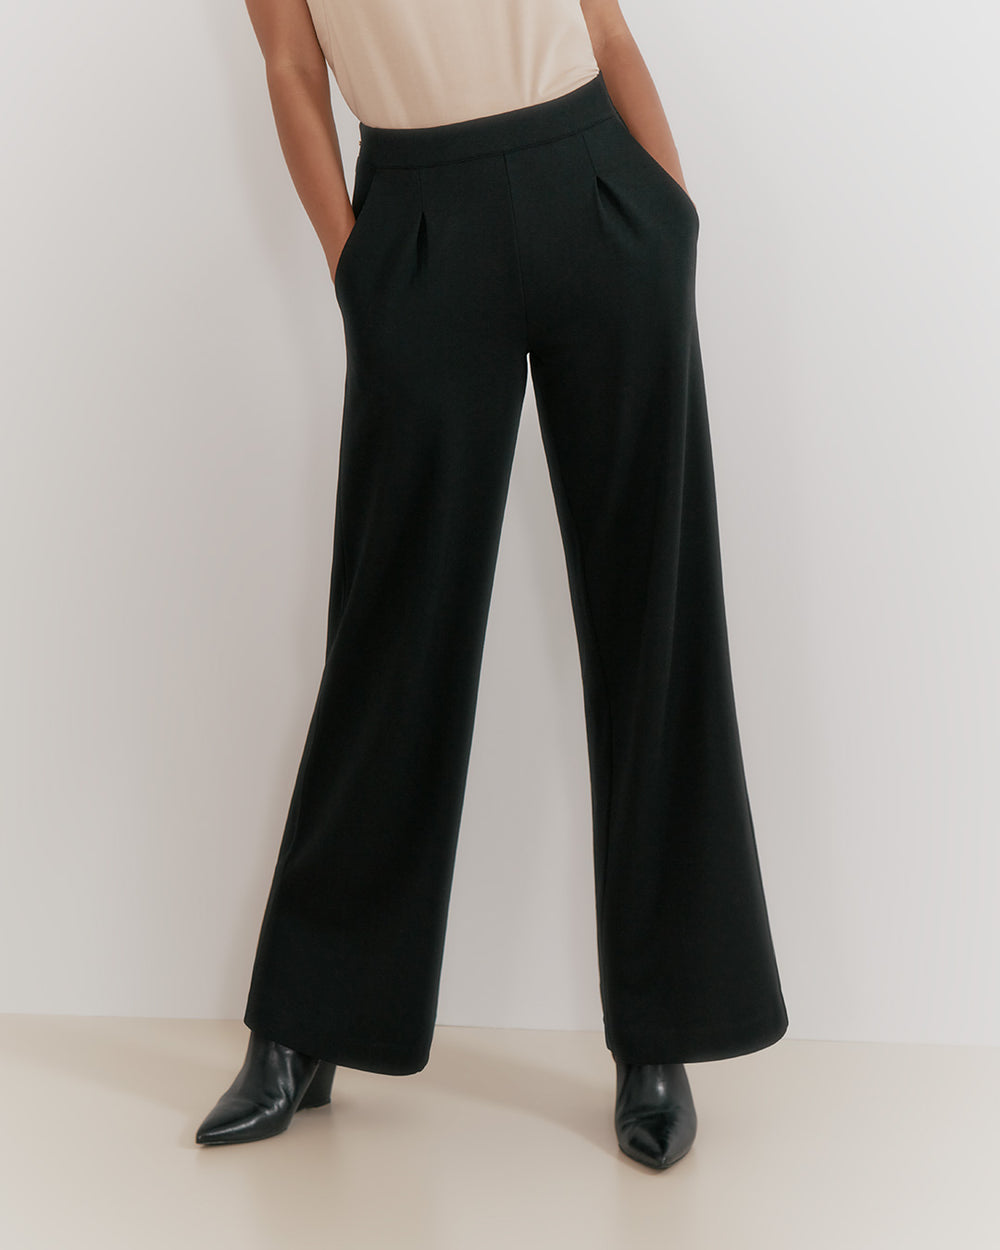 Person standing in wide-legged trousers and shoes.